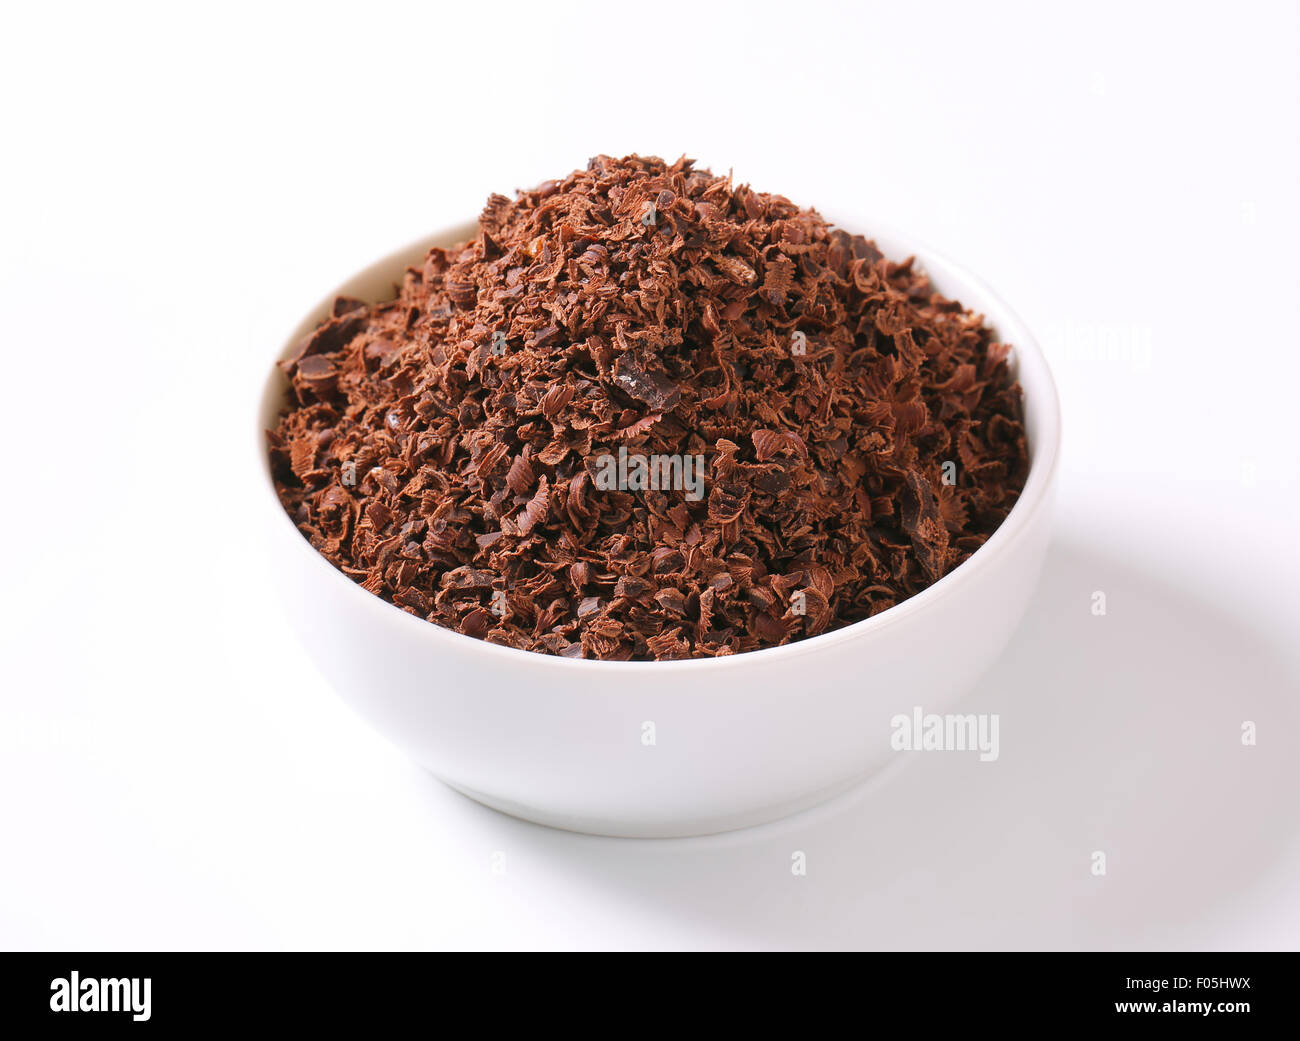 Bowl of grated plain chocolate Stock Photo